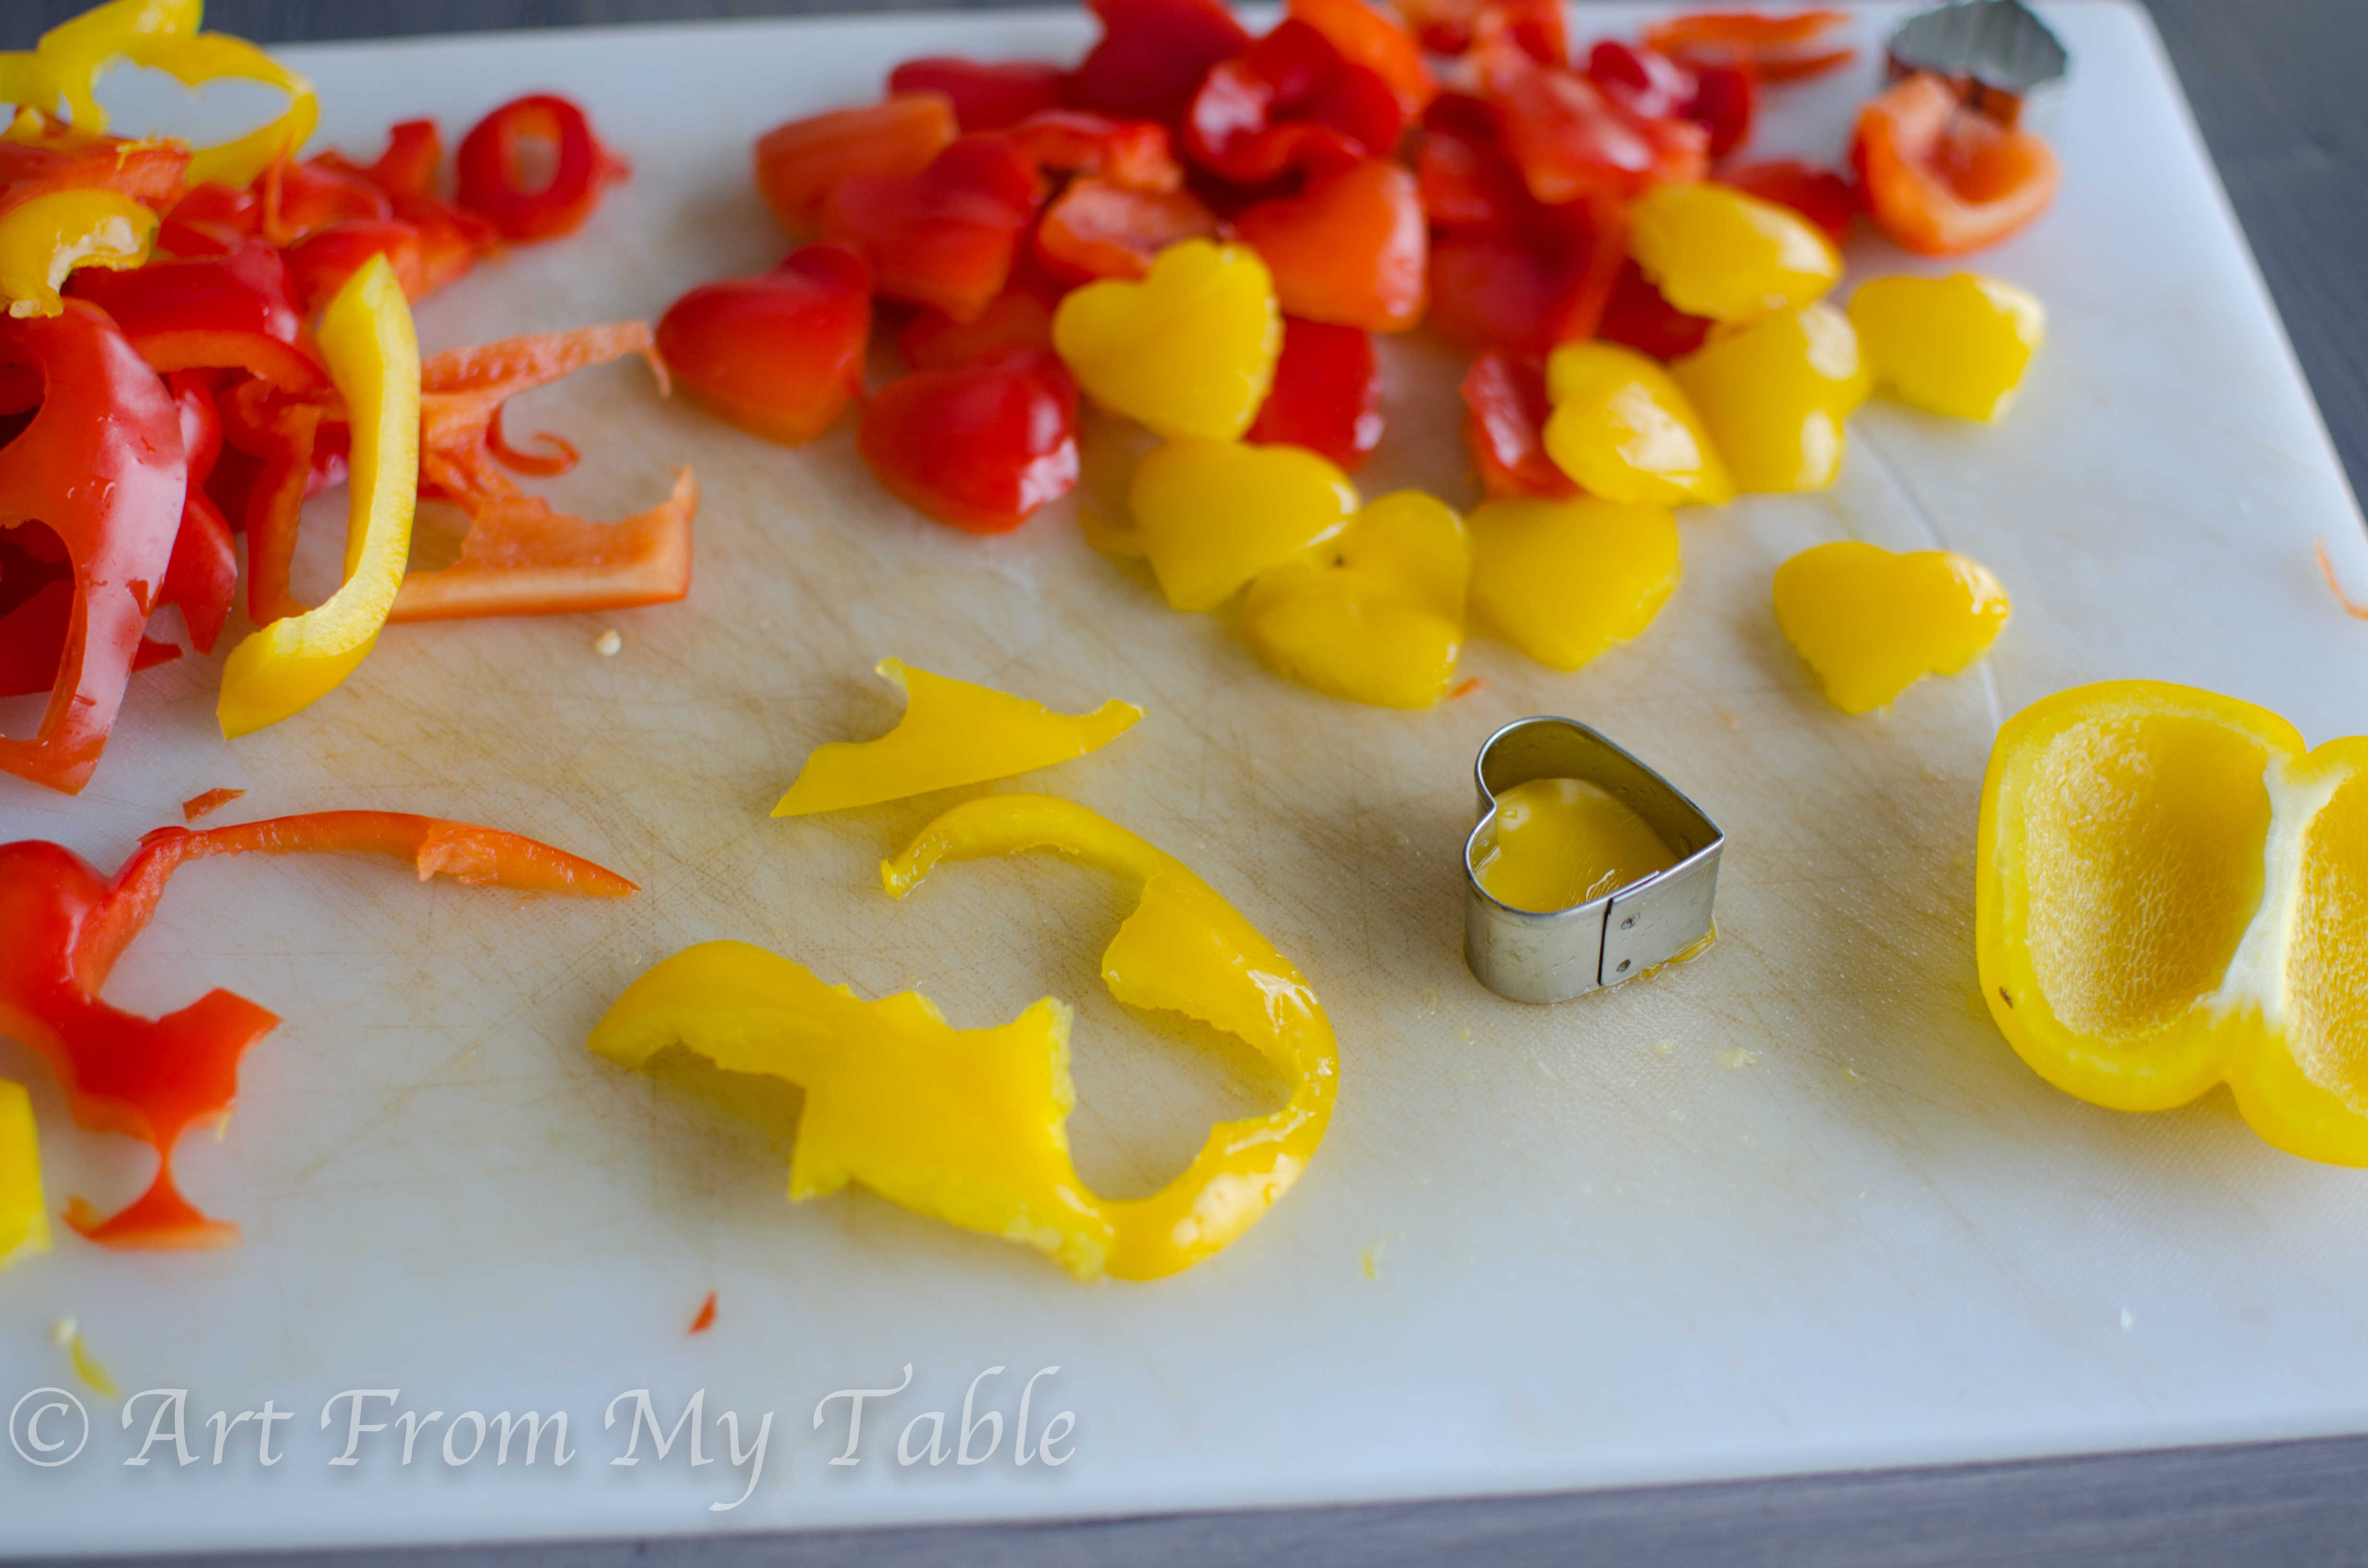 Bell peppers being cut into hears with a cookie cutter to make a healthy valentine snack.